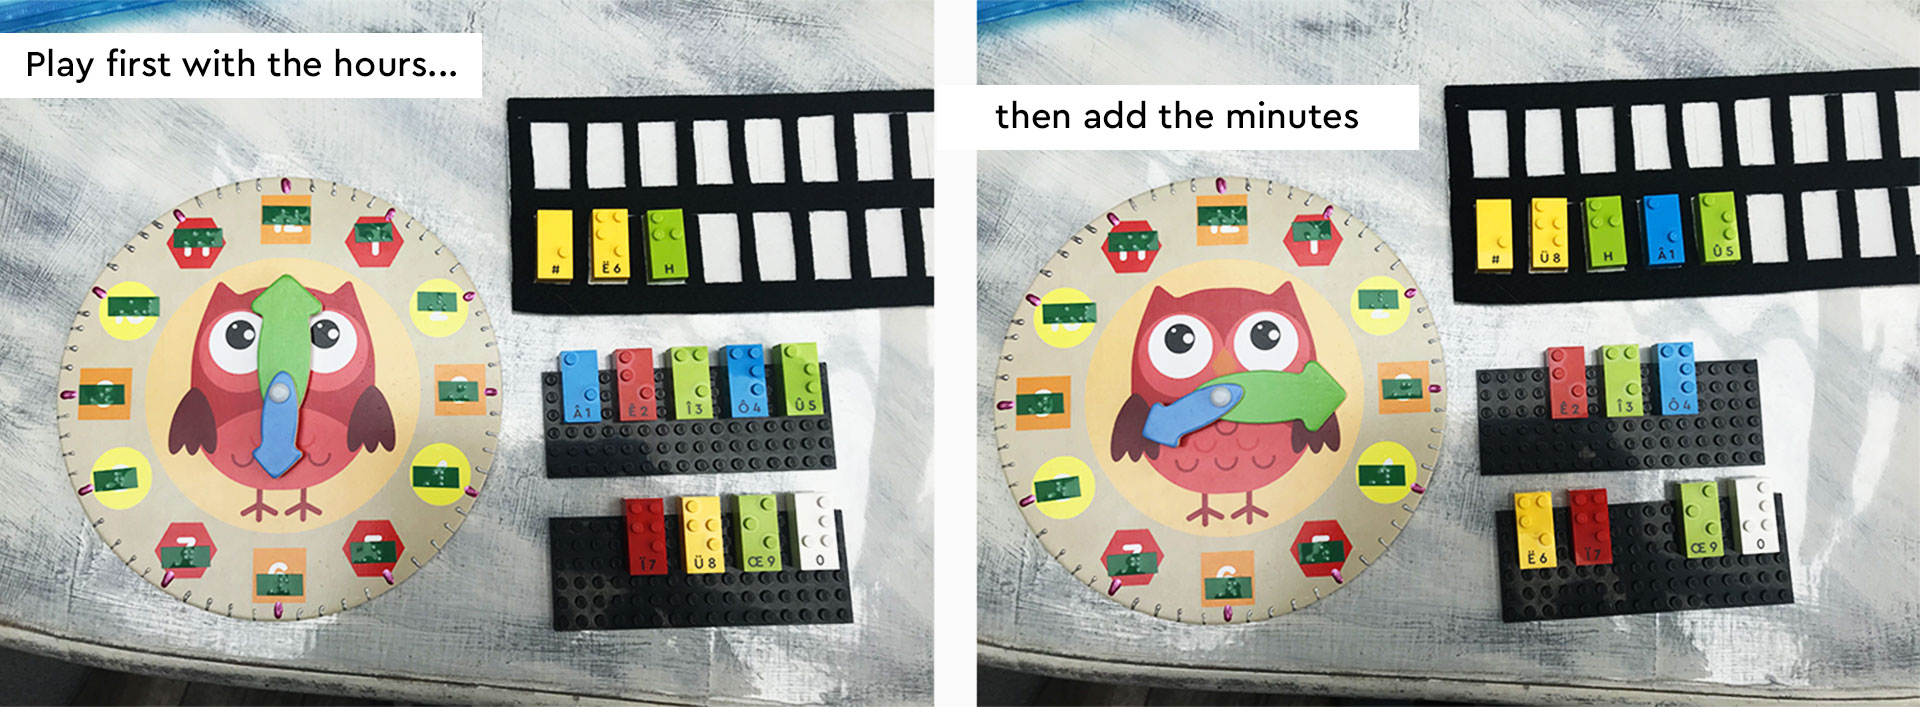 A clock with hours tags in braille and a grid with LEGO Braille Bricks to write the time. Play with the hours to begin. Then add the minutes.